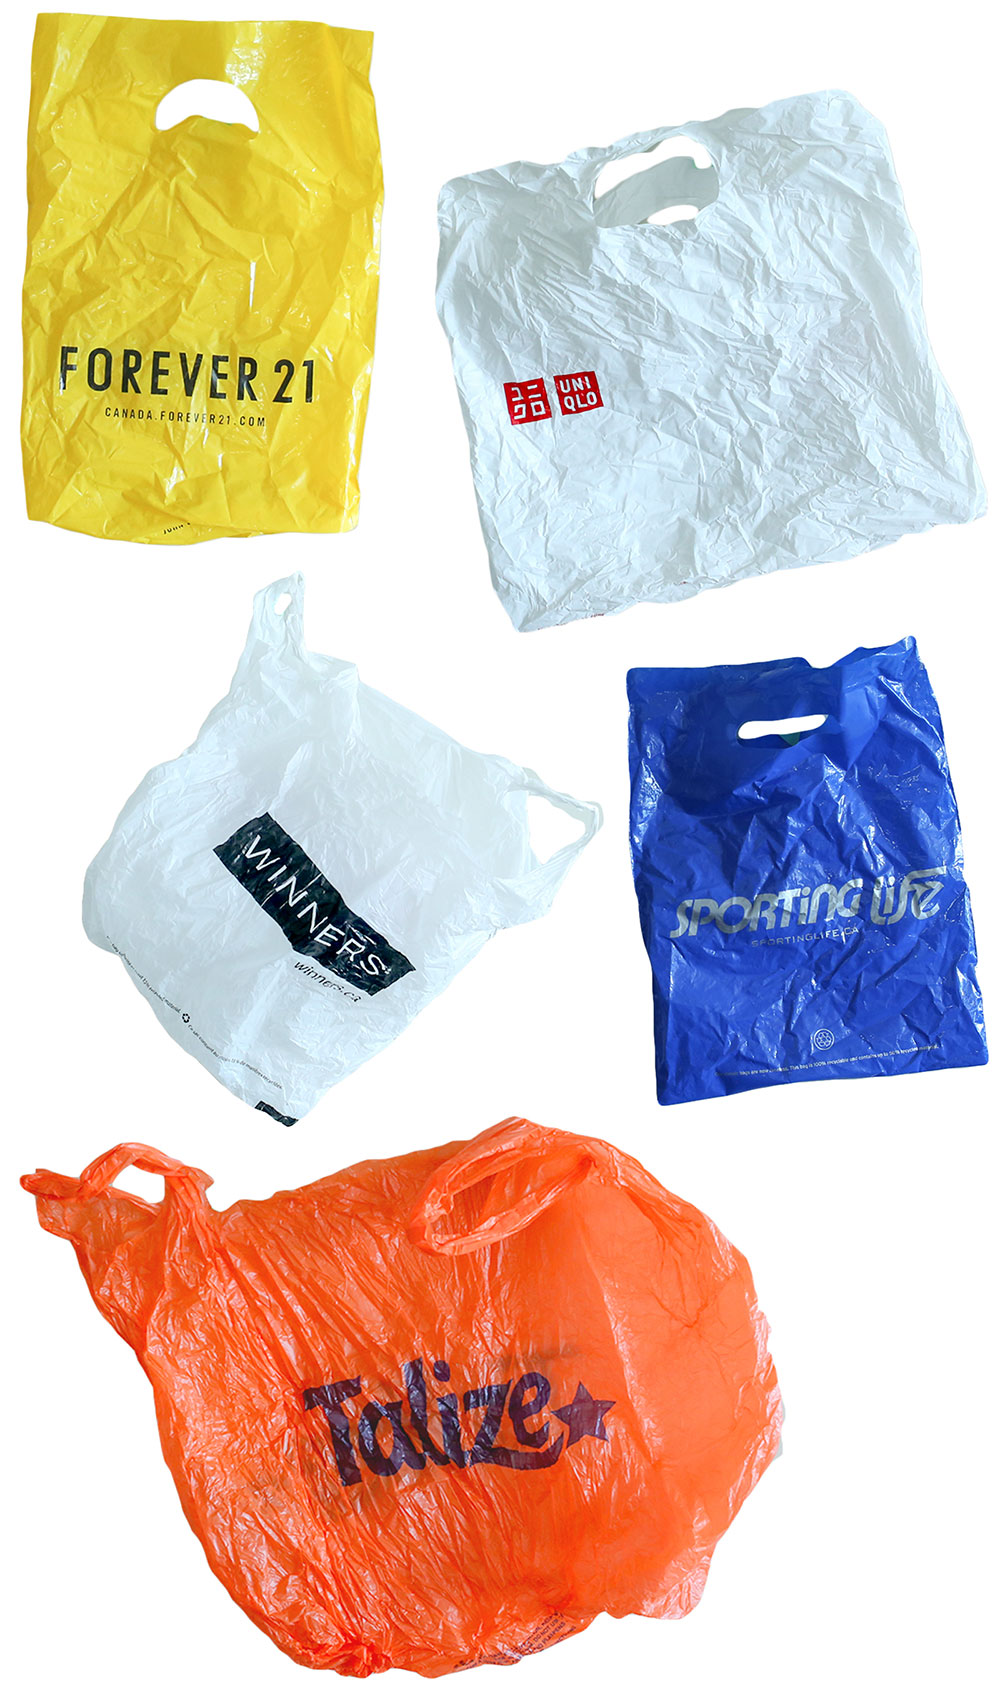 A colourful collection of five plastic bags against a white background.